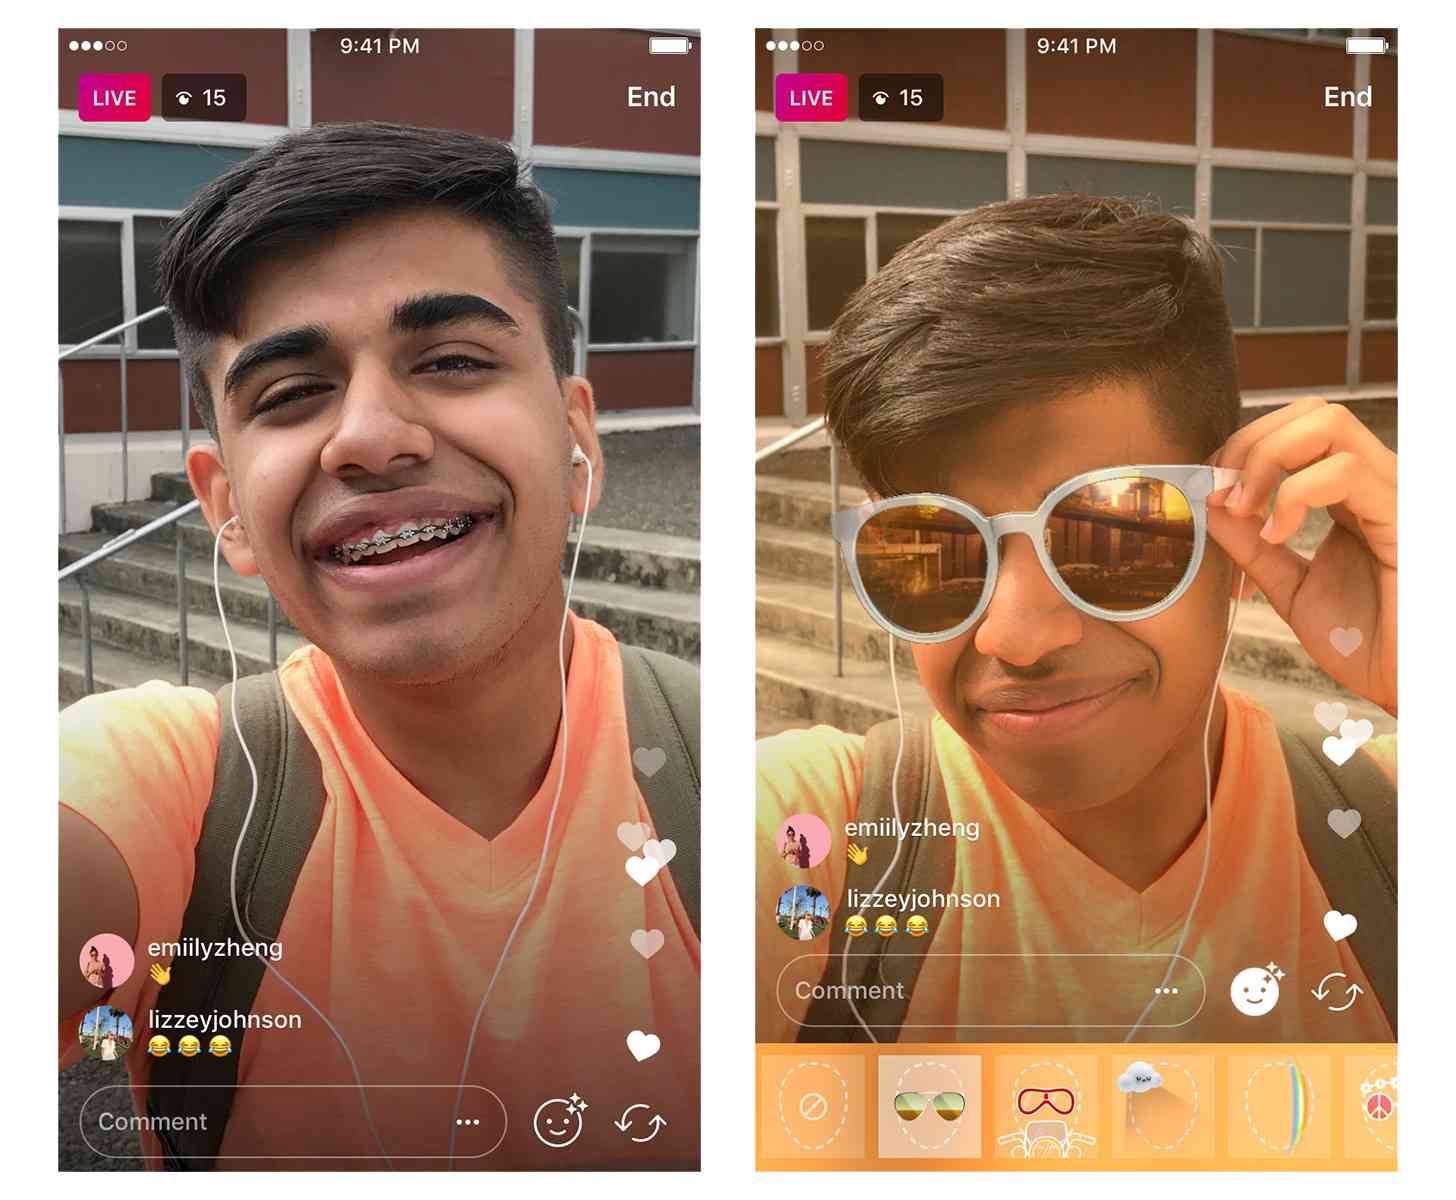 Instagram live video face filters